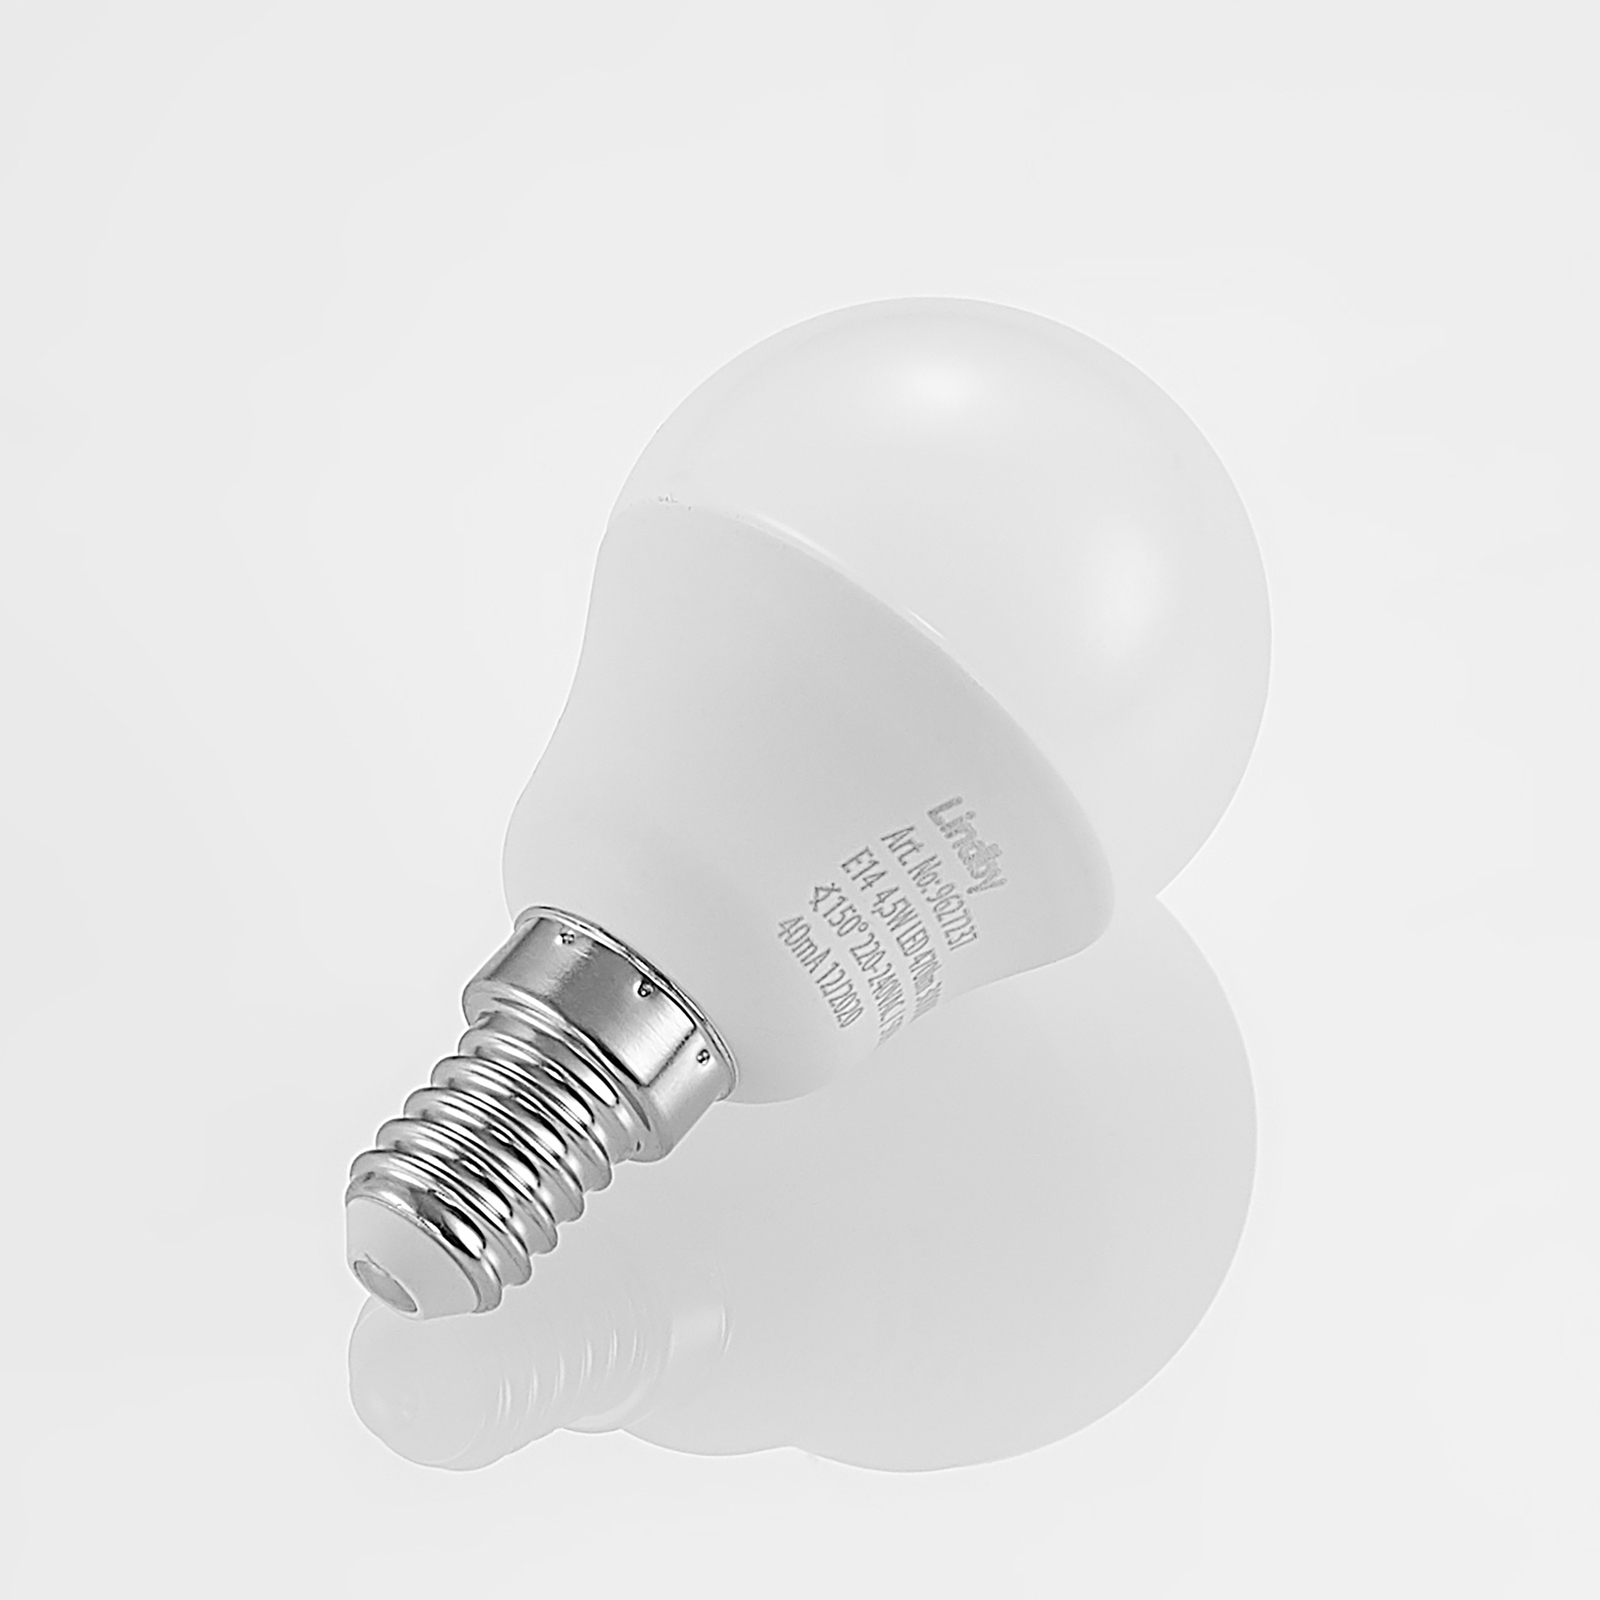 Lindby LED druppellamp E14 G45 4,5W 3.000K opaal